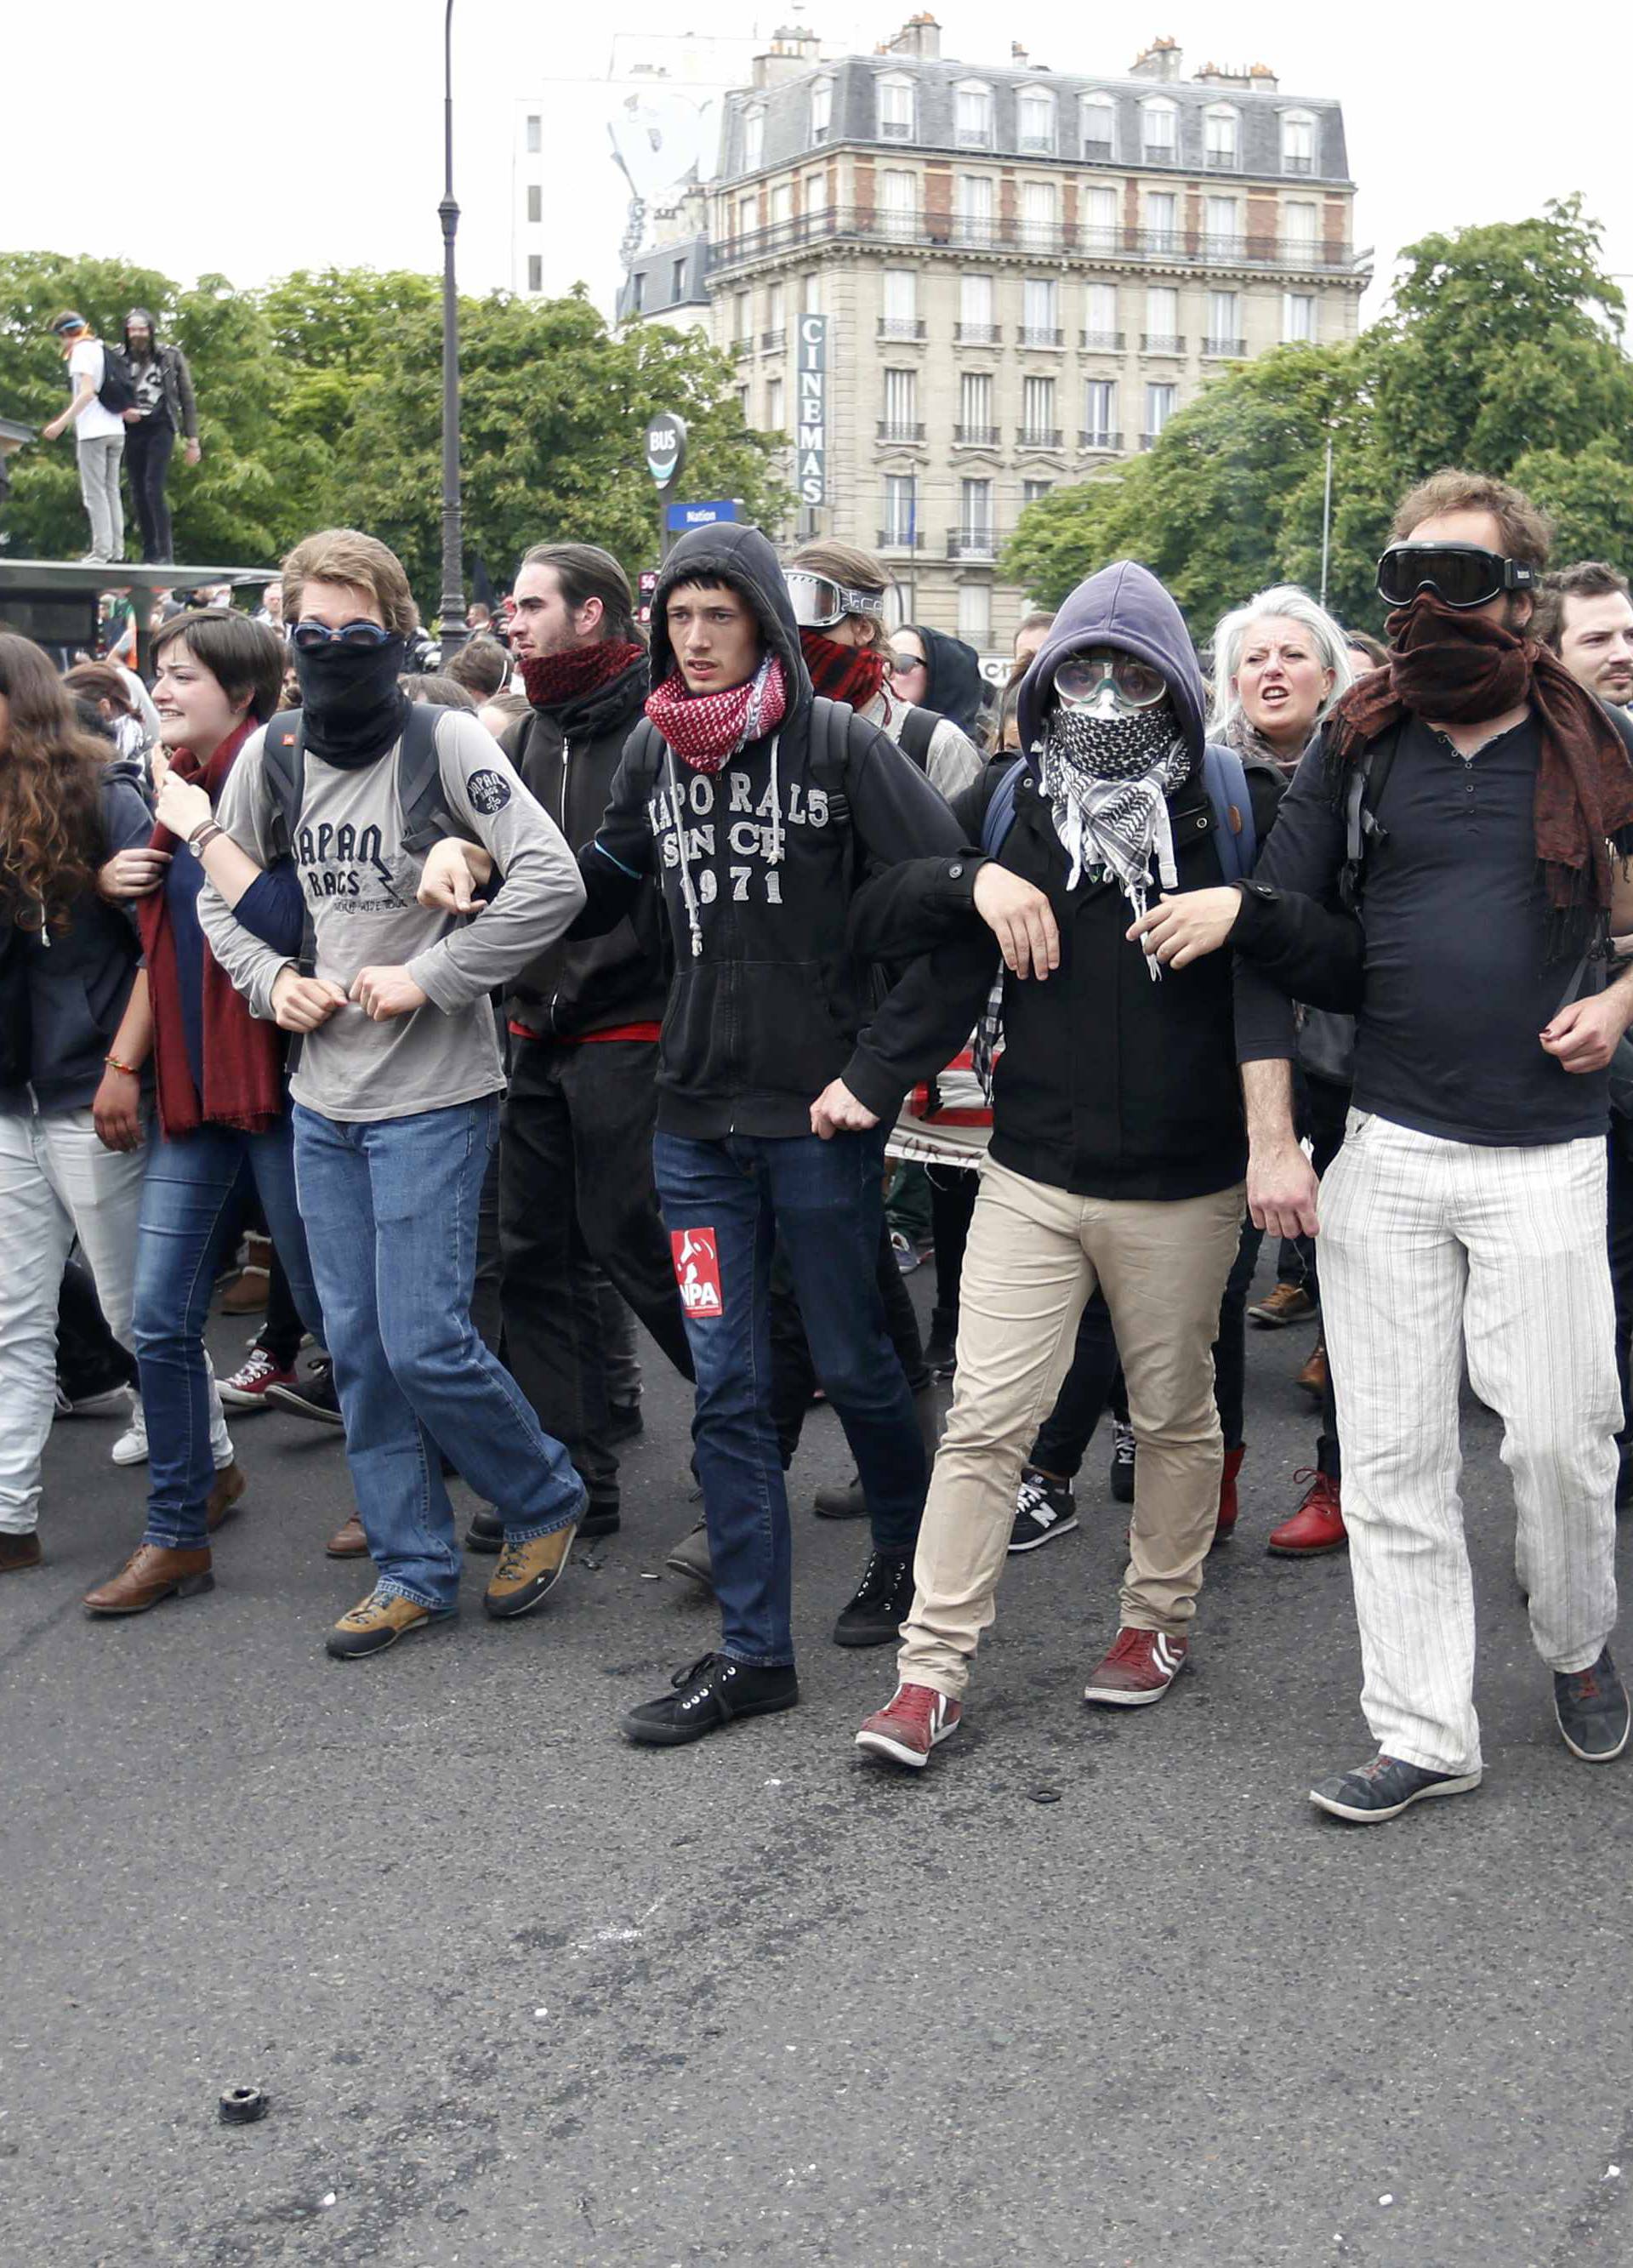  Masked youths take part in a demonstration in protest of the government's proposed labor law reforms in Paris